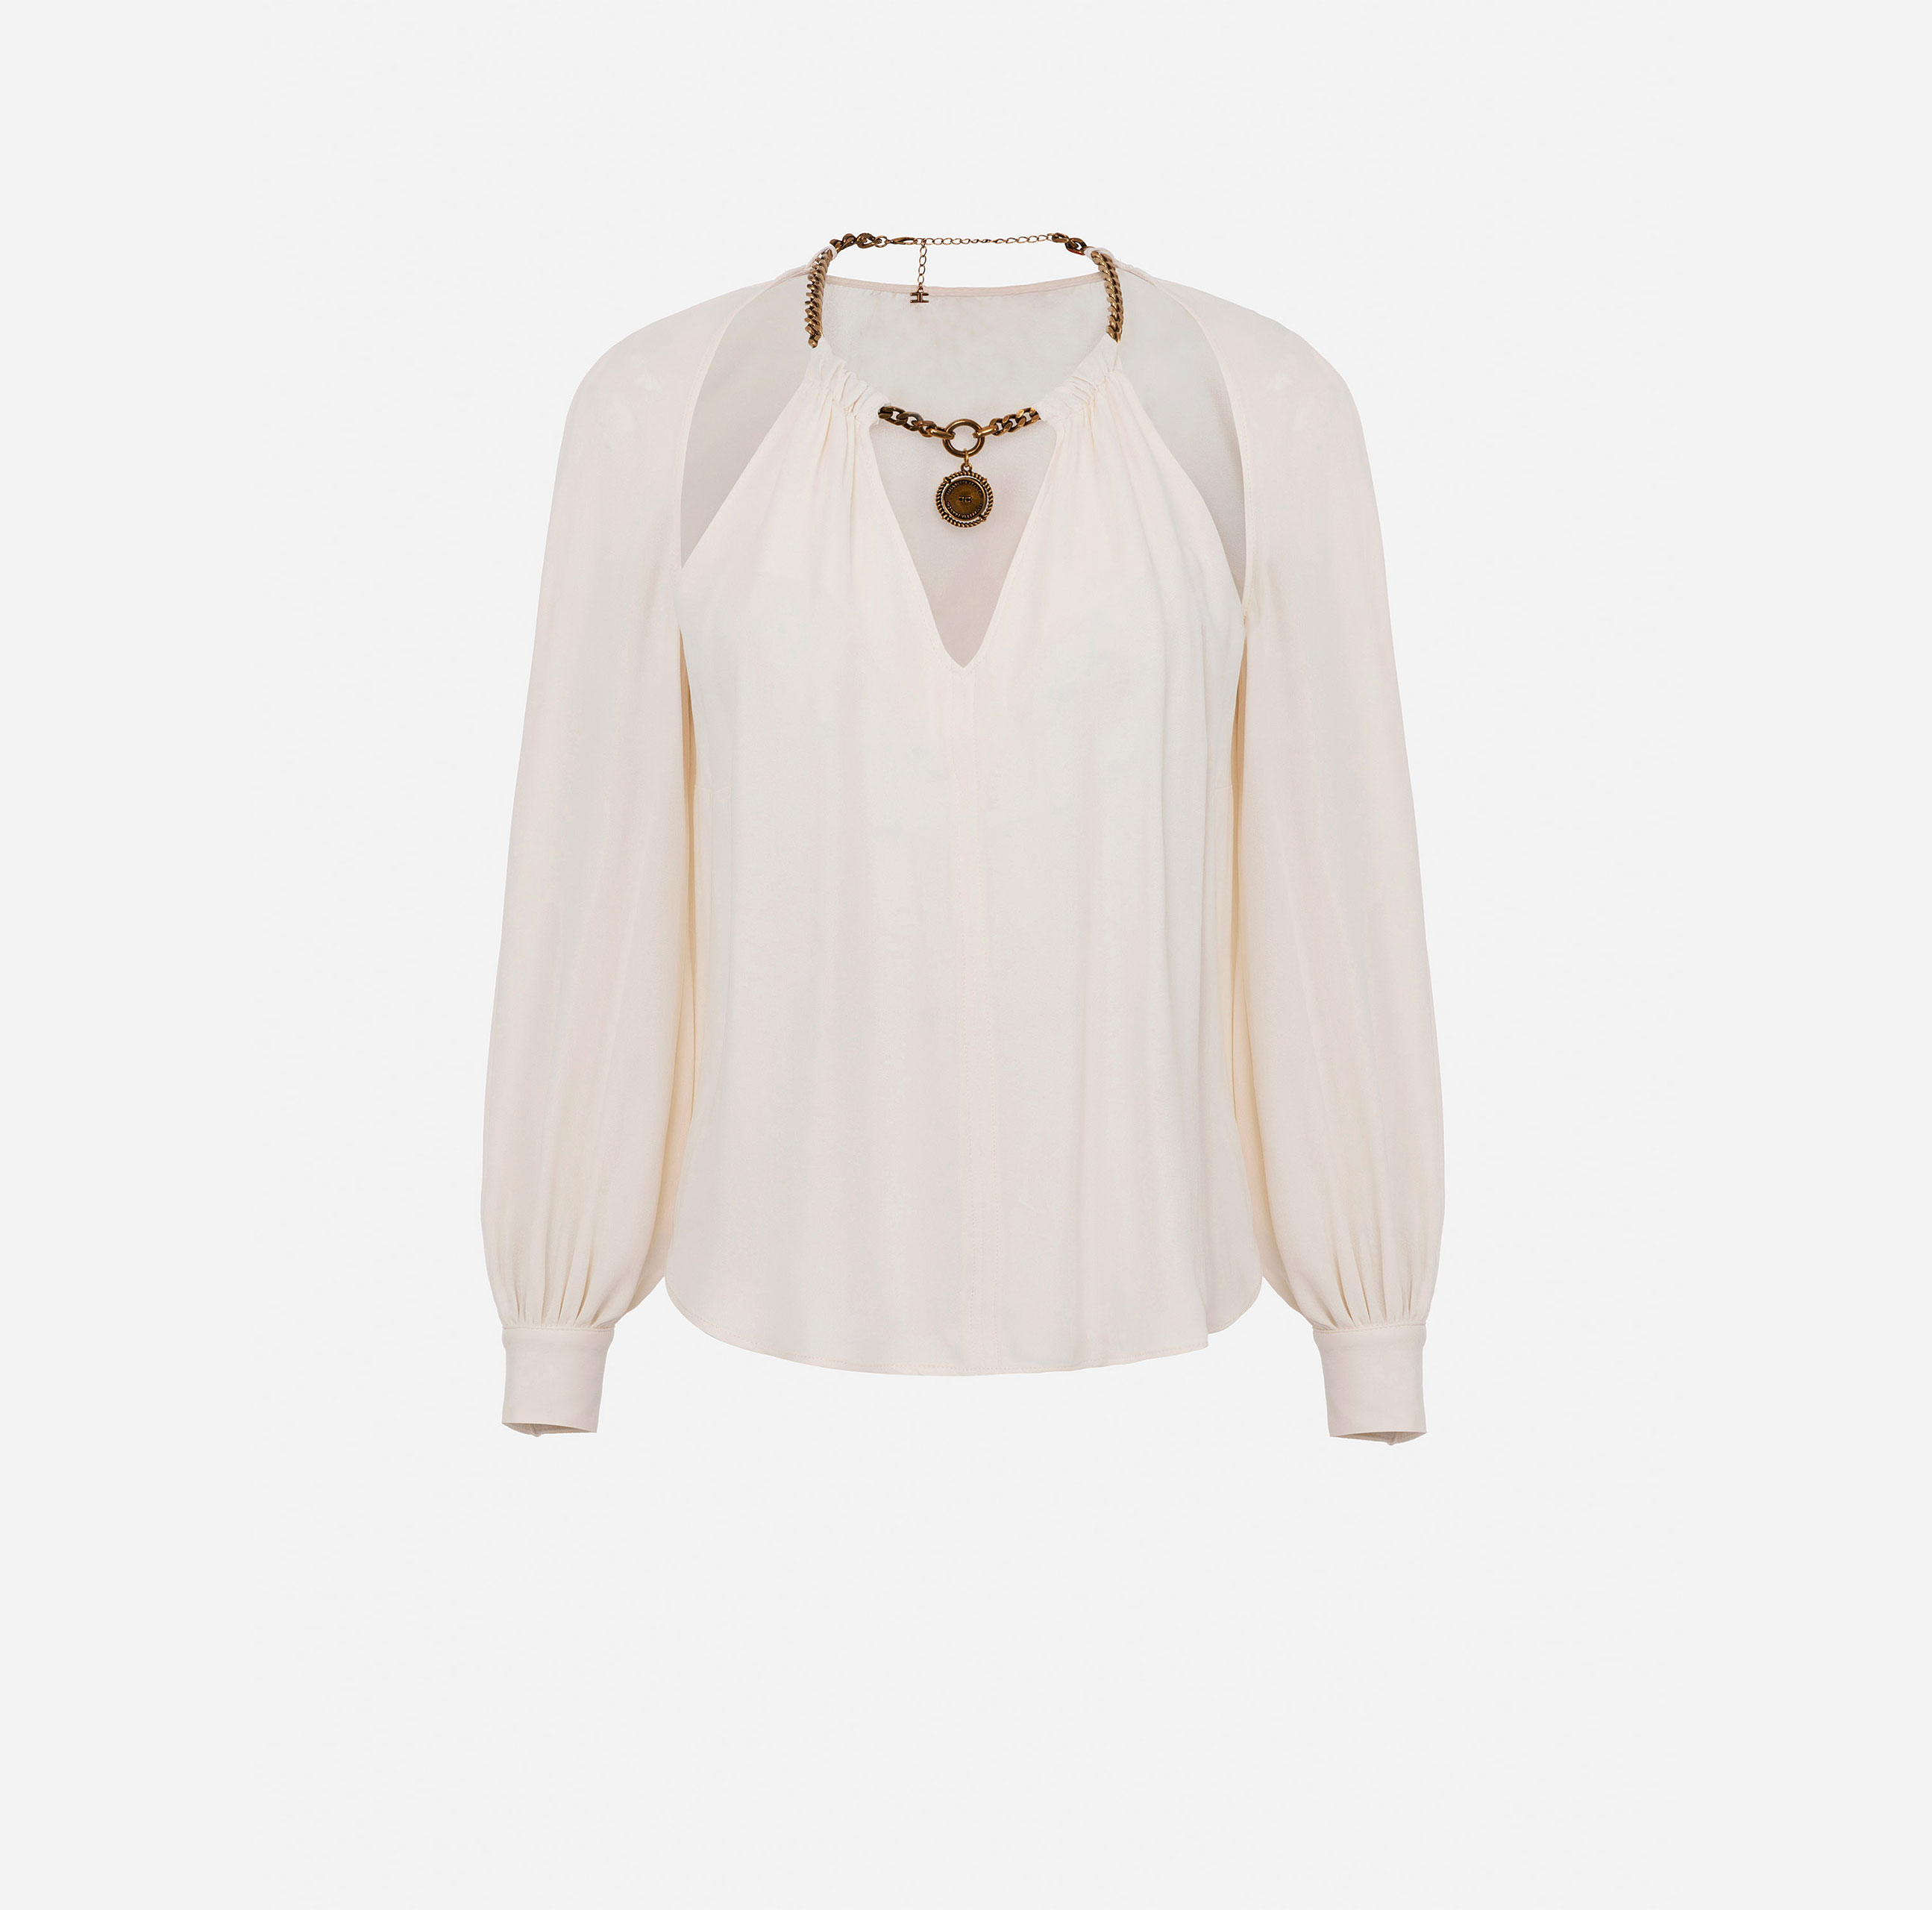 Blouse with necklace in the neckline - Elisabetta Franchi